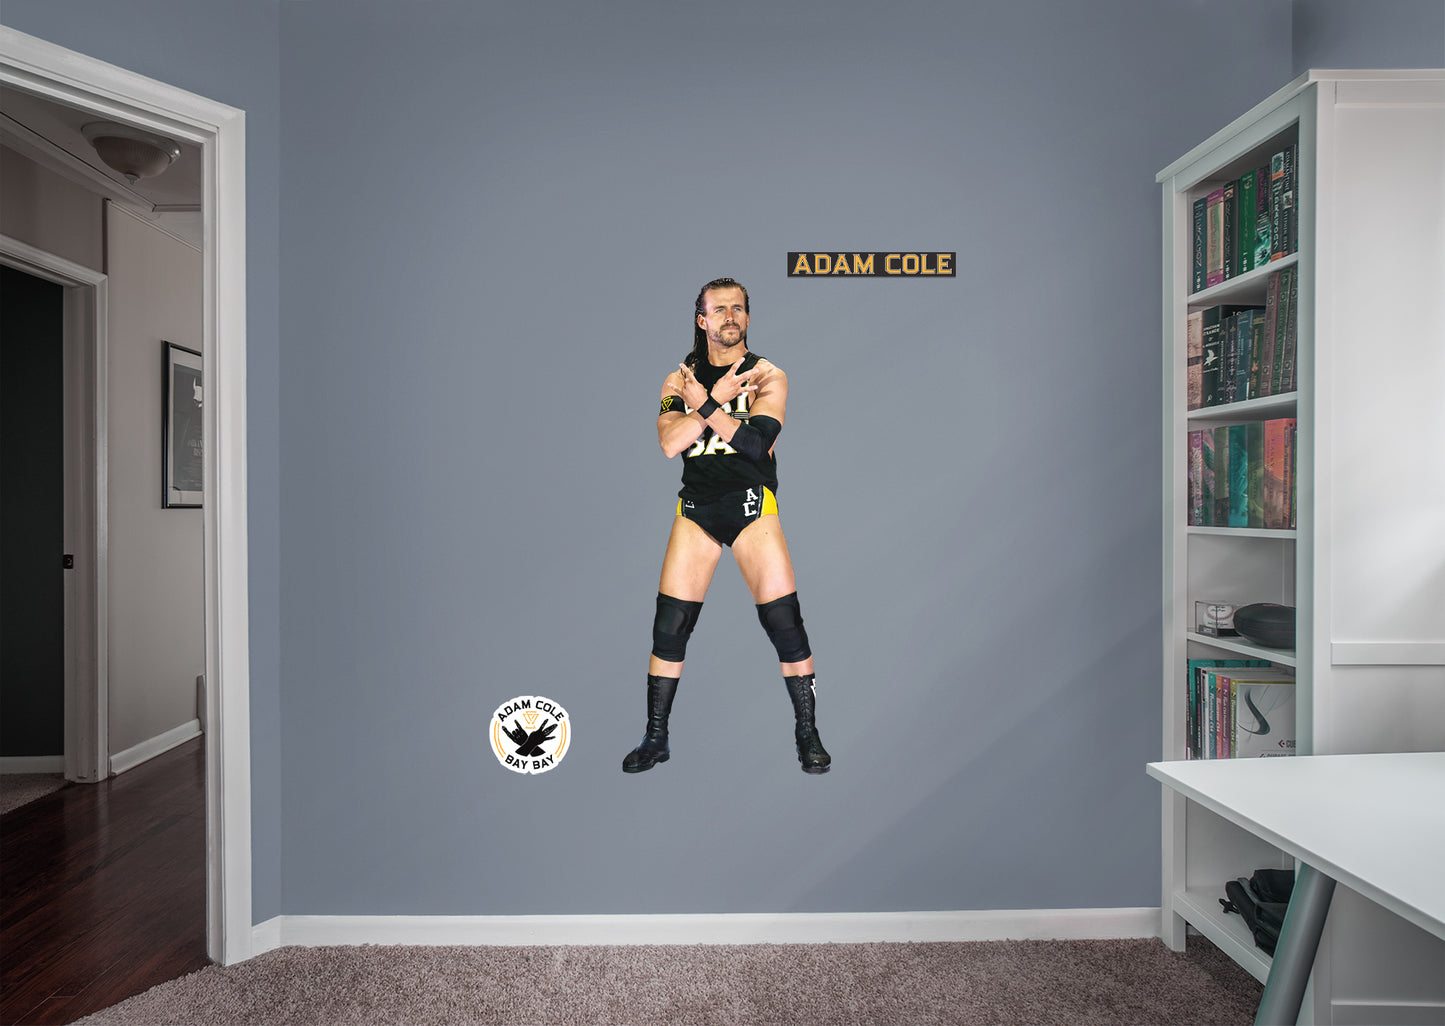 Bring the action of WWE into your home with this set of Adam Cole wall decals! High quality, durable, and tear resistant, you'll be able to stick and move them as many times as you want to create the ultimate wrestling experience.      FEATURES: Thick, high-grade vinyl resists tears, rips & fading. Reusable design is safe for walls. Sticks to most smooth surfaces.   DETAILS: Indoor use. No tape or tacks required. Made in USA.